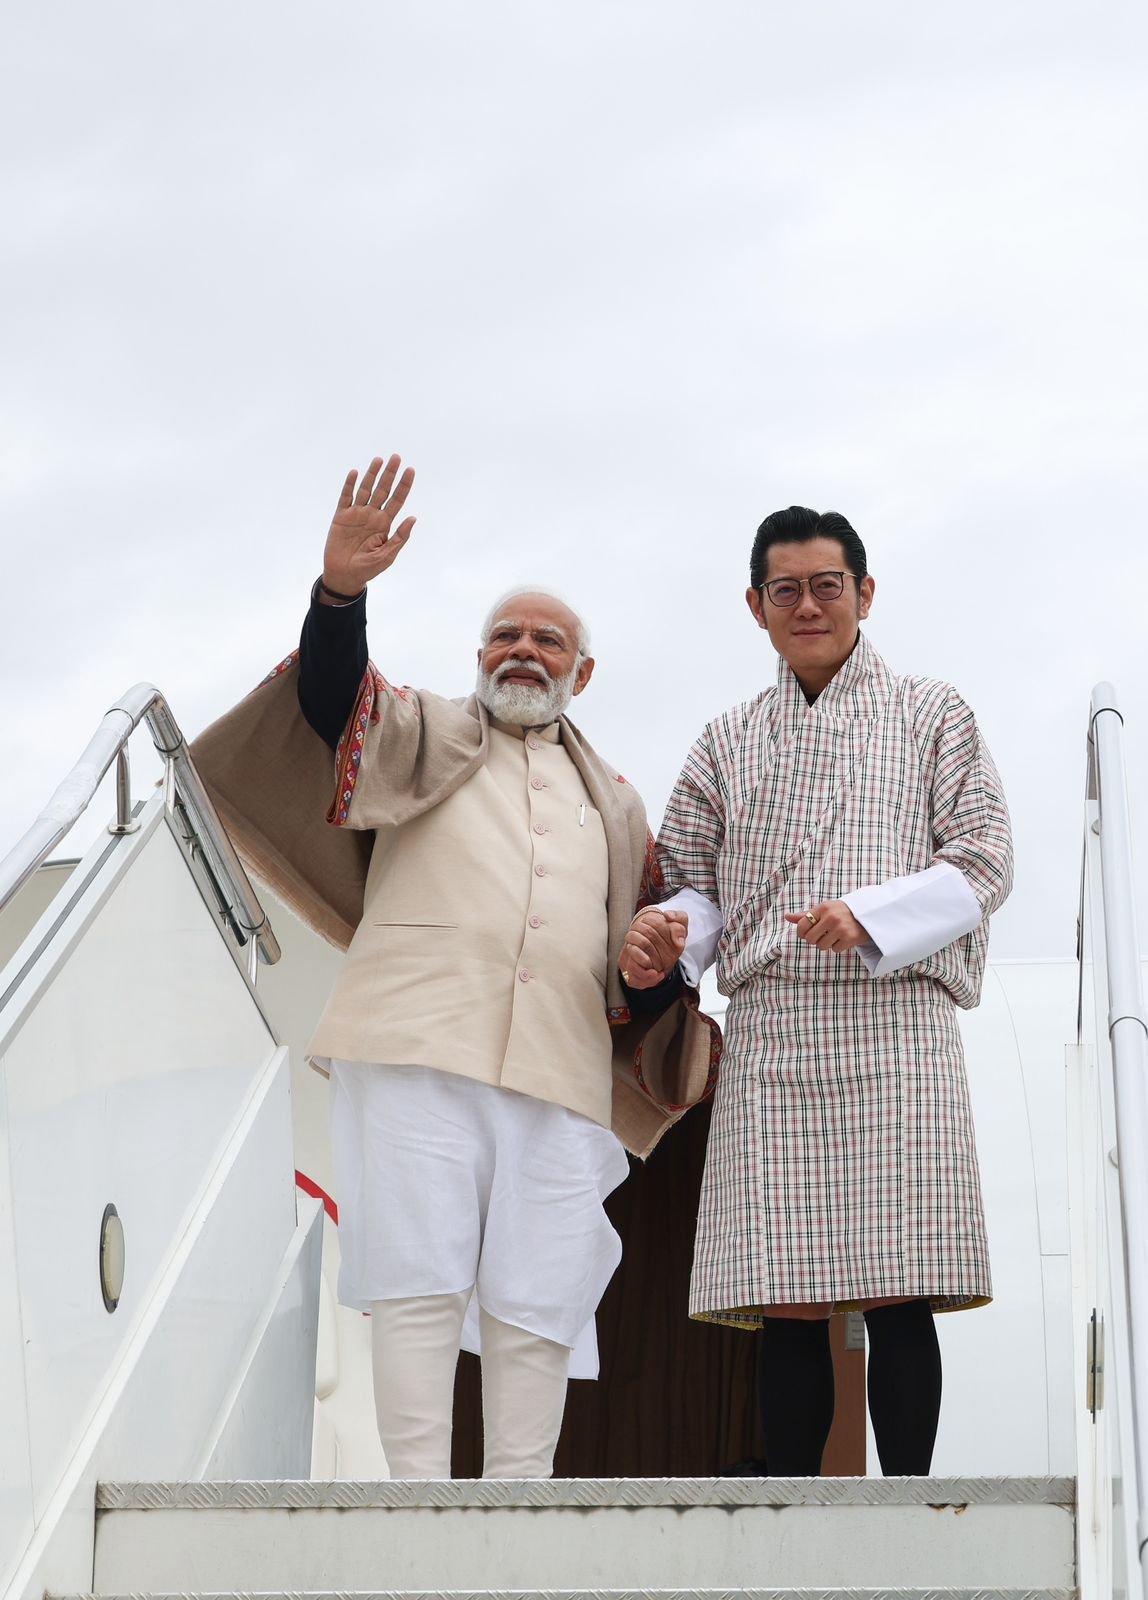 PM Modi concludes fruitful two-day Bhutan trip; here are some key highlights